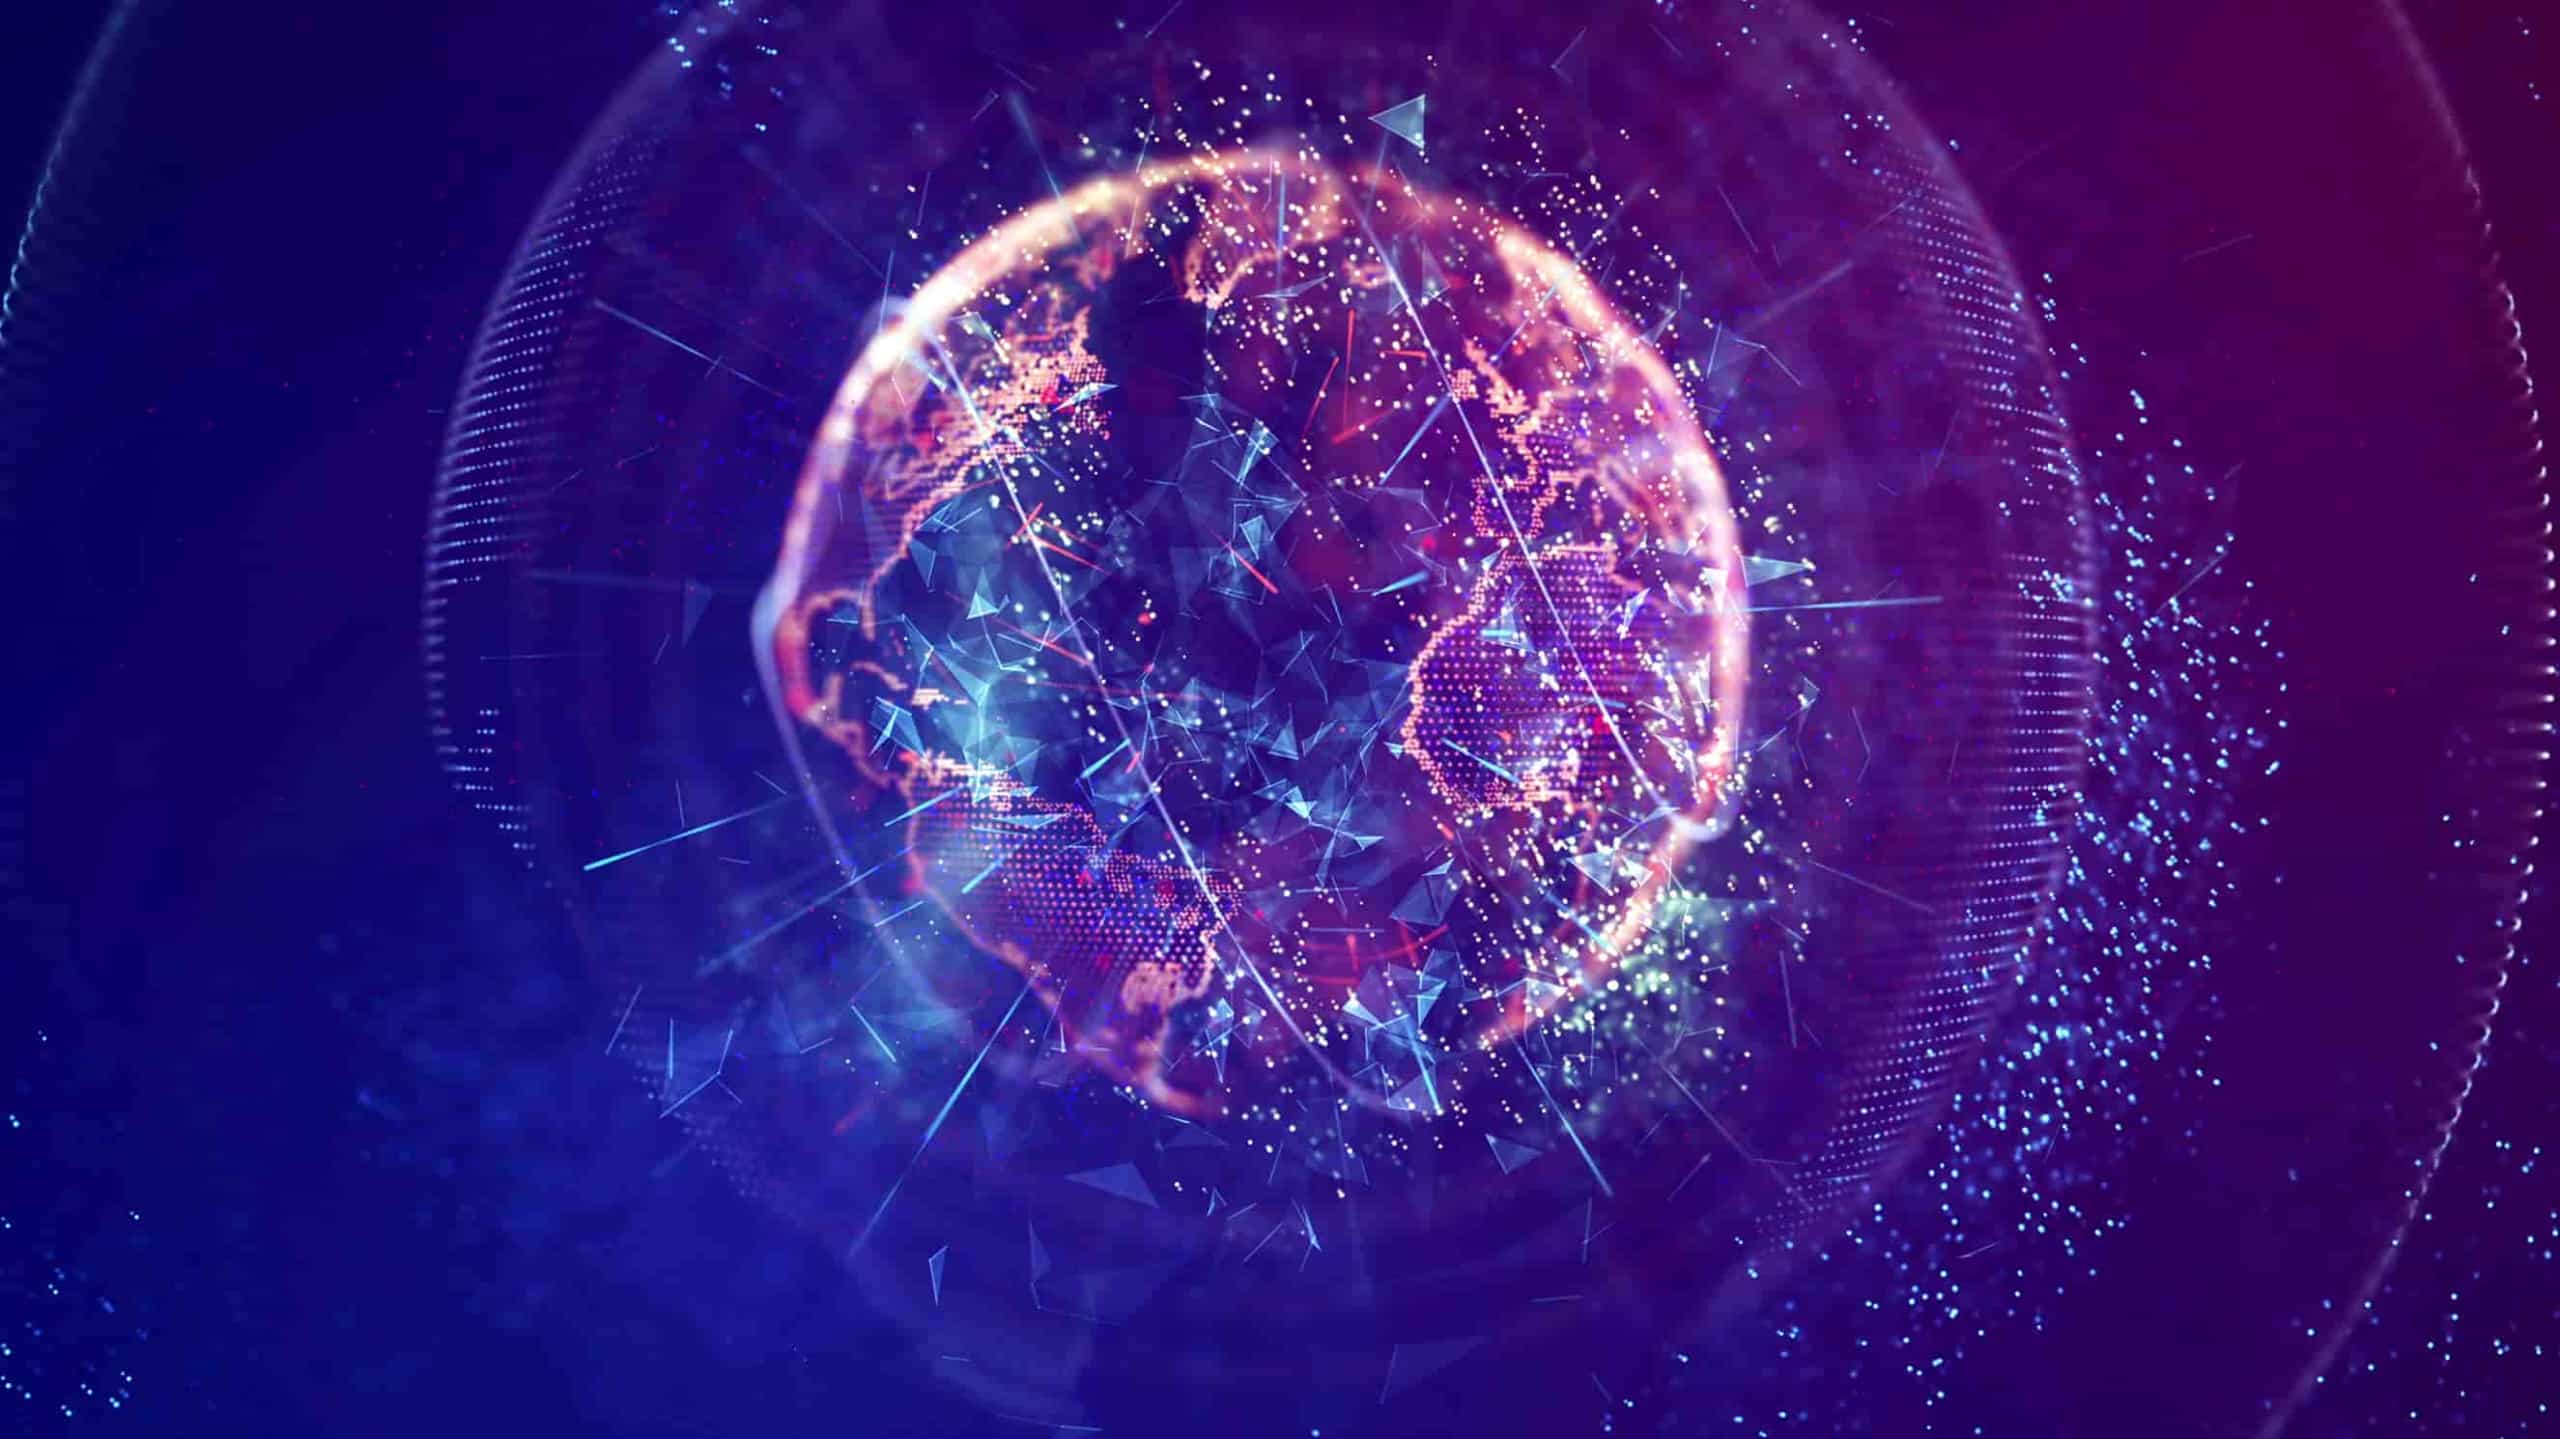 A digital illustration of a glowing, interconnected network encompassing a stylized, futuristic earth against a dark blue background with shining particles and light rays.